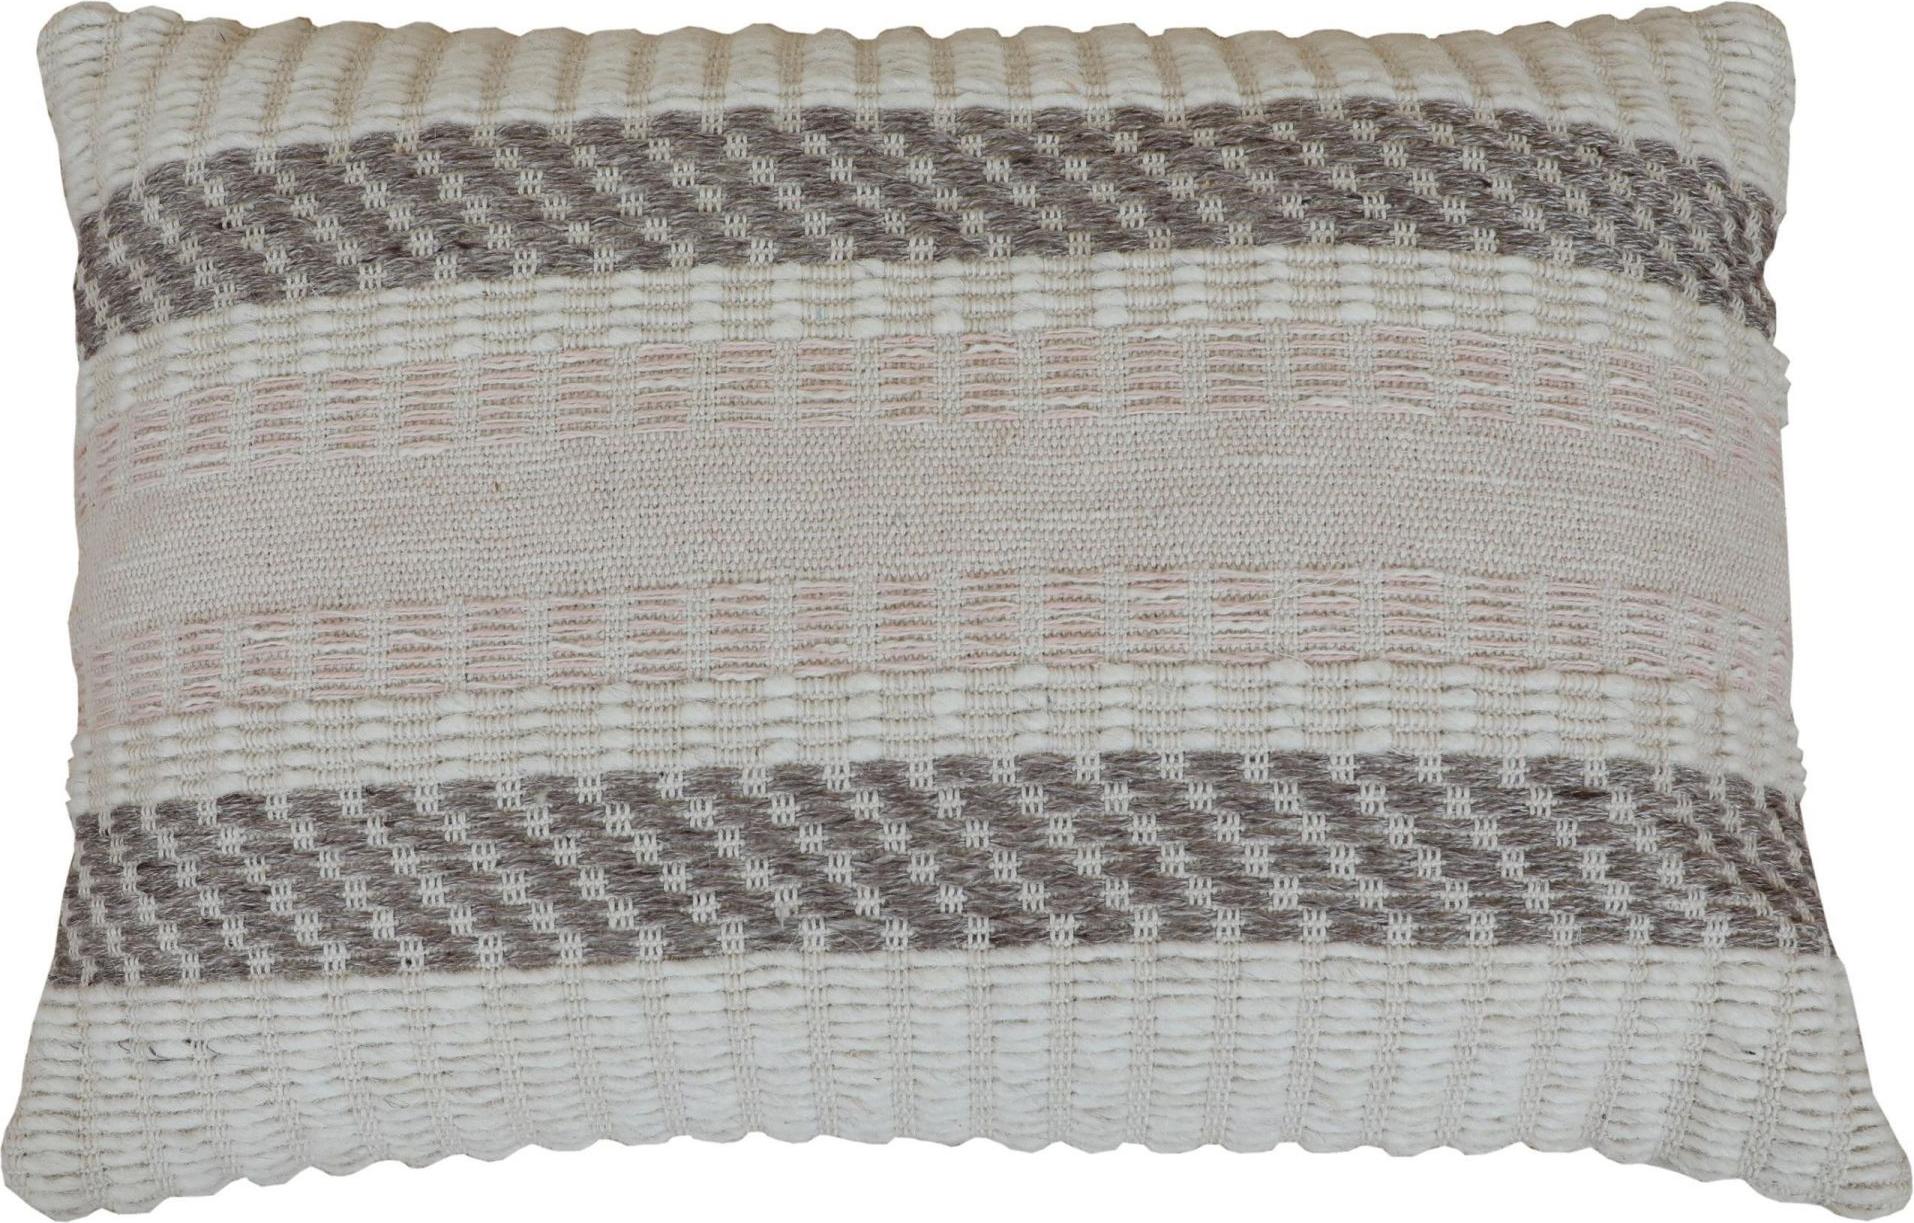 Hand-Knotted Modern Wool and Cotton Pillow With Geometric Pattern In Muted Tones For Sale